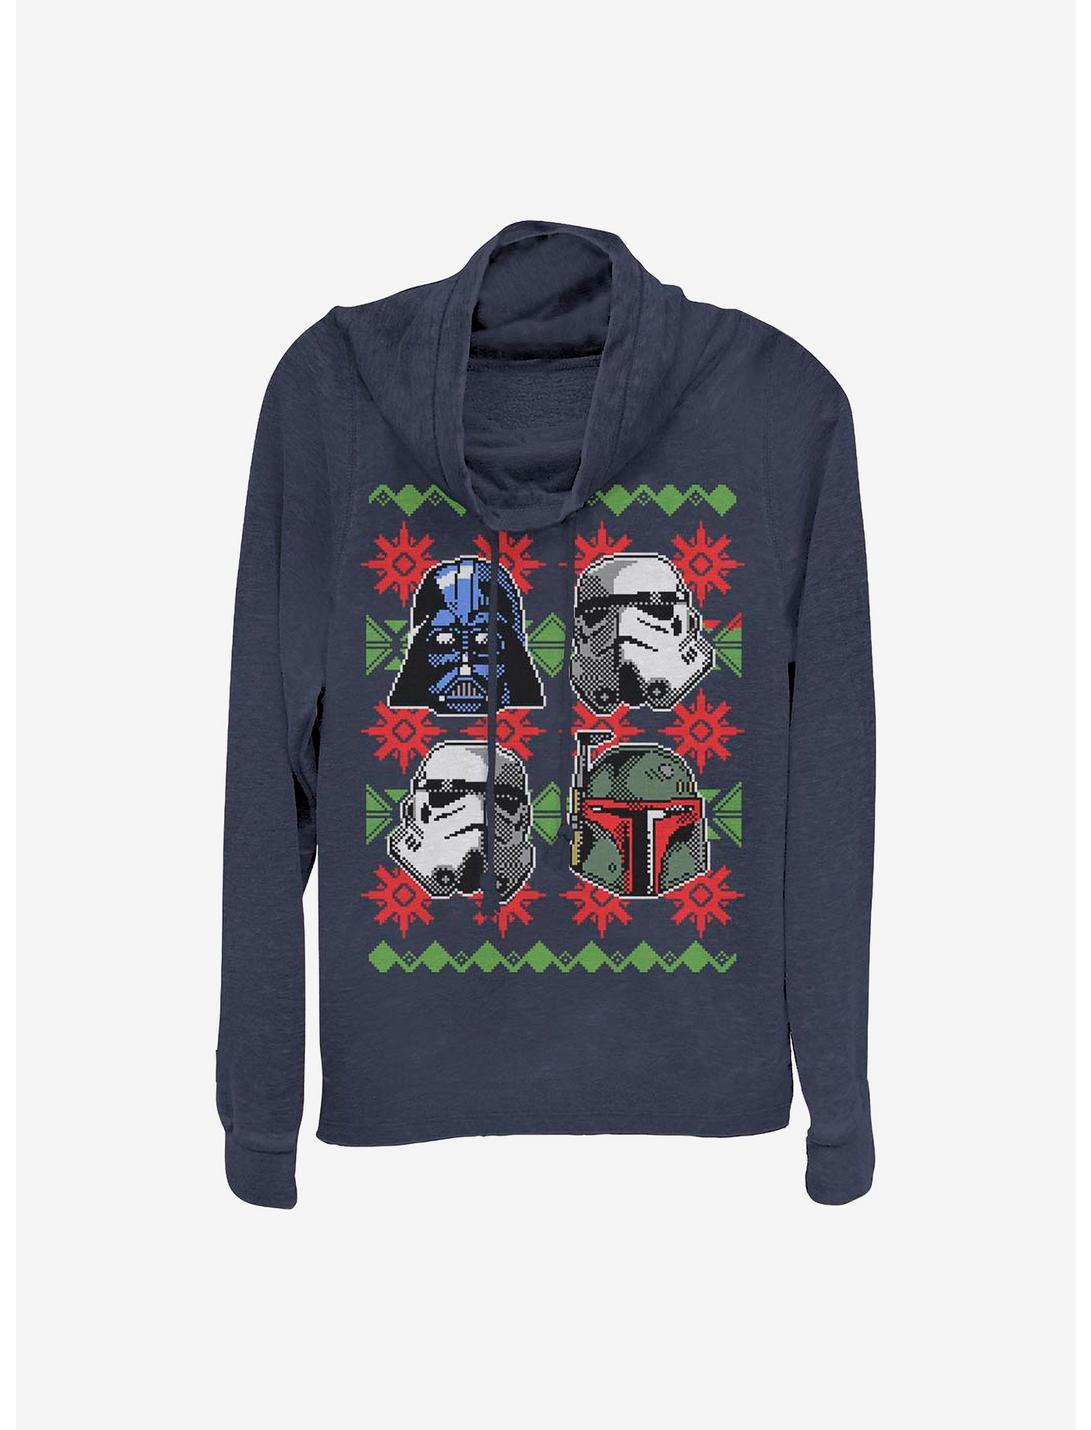 Star Wars Holiday Faces Cowl Neck Long-Sleeve Girls Top, NAVY, hi-res